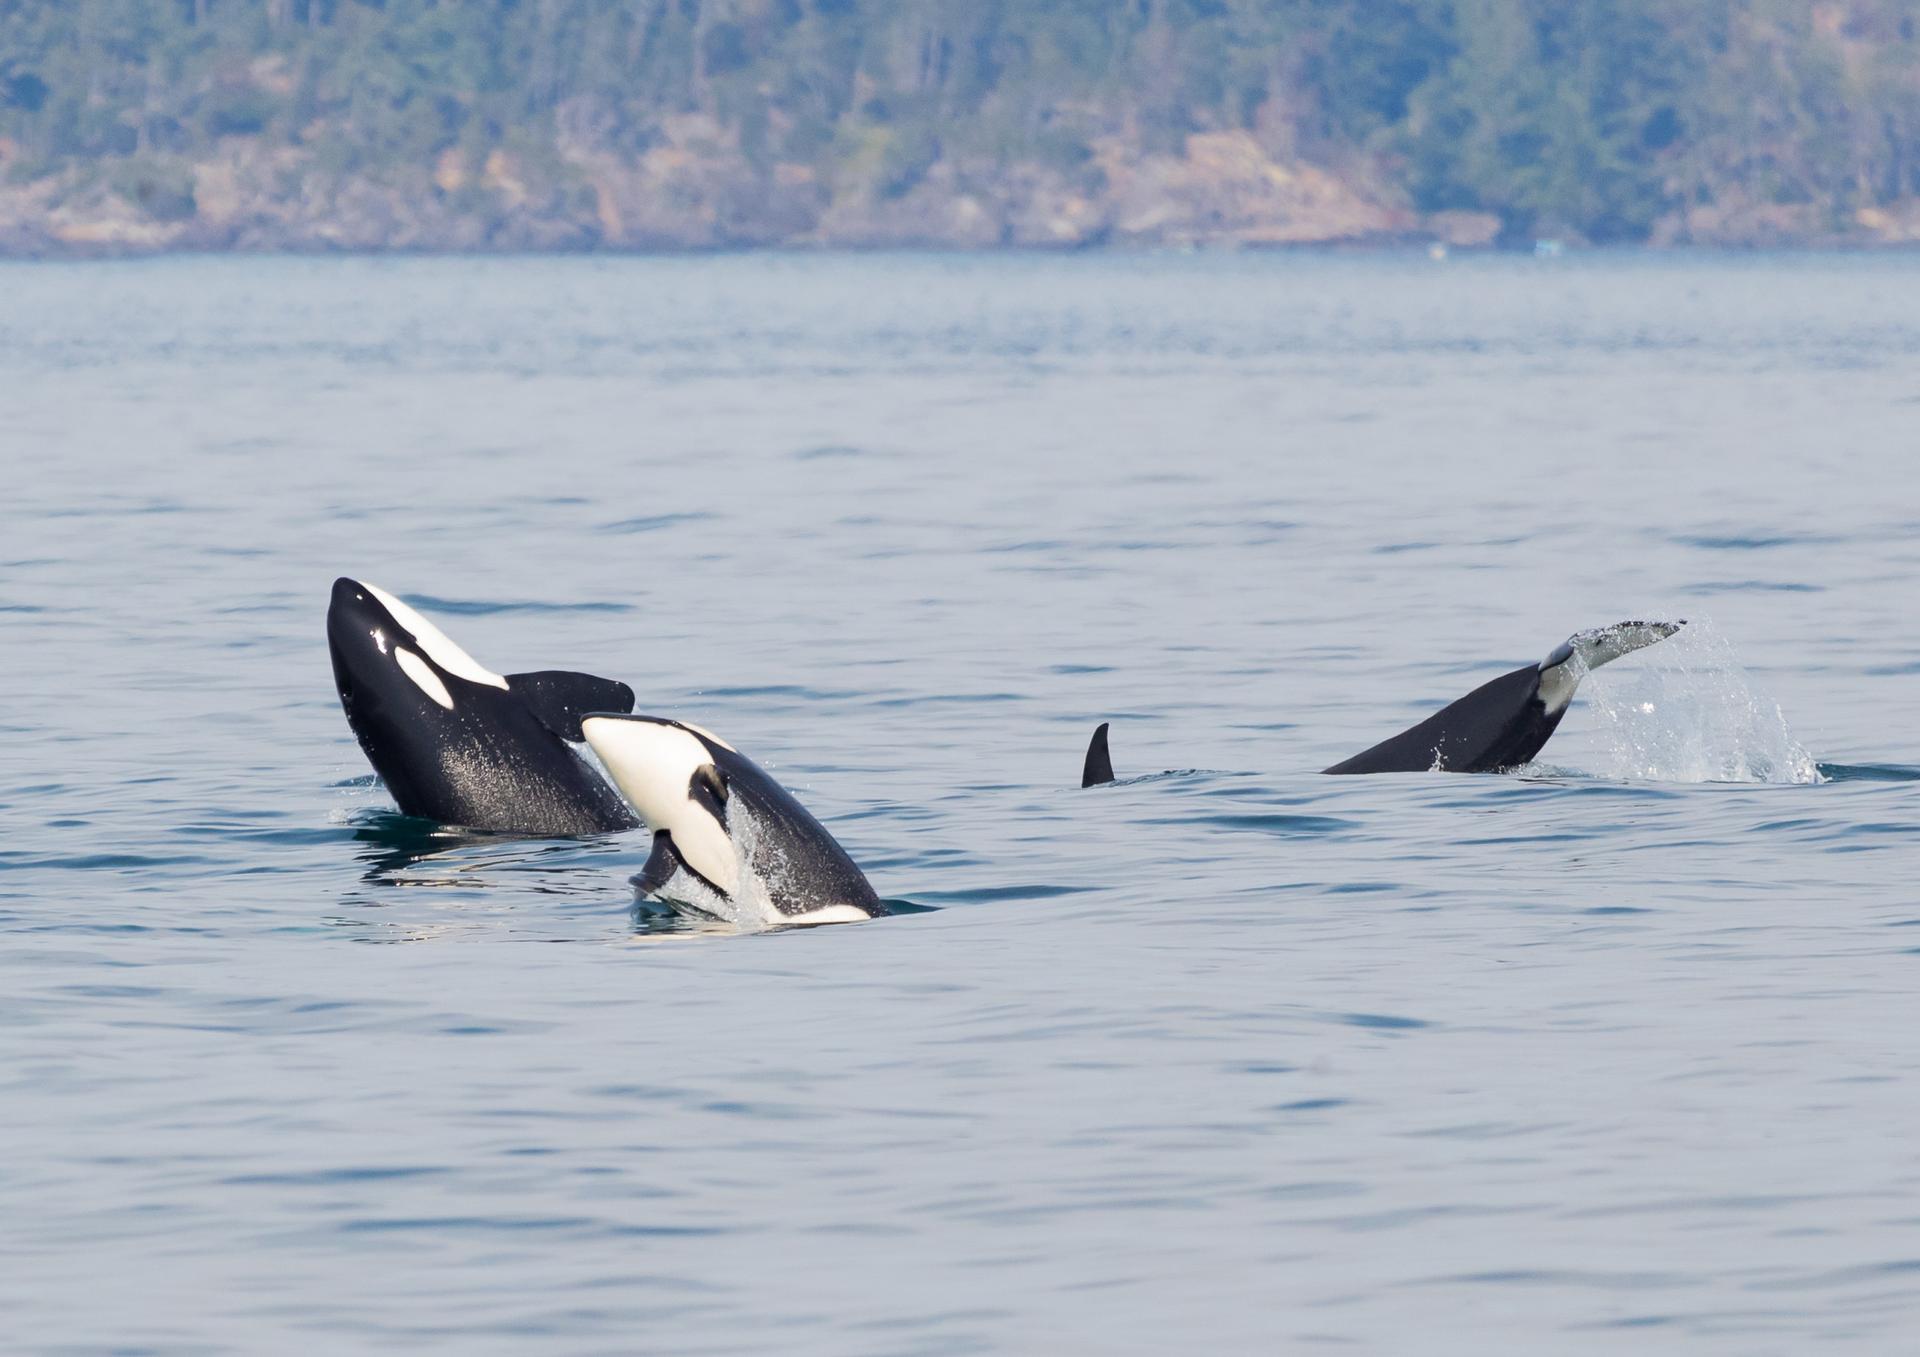 Killer Whale family with a double breach